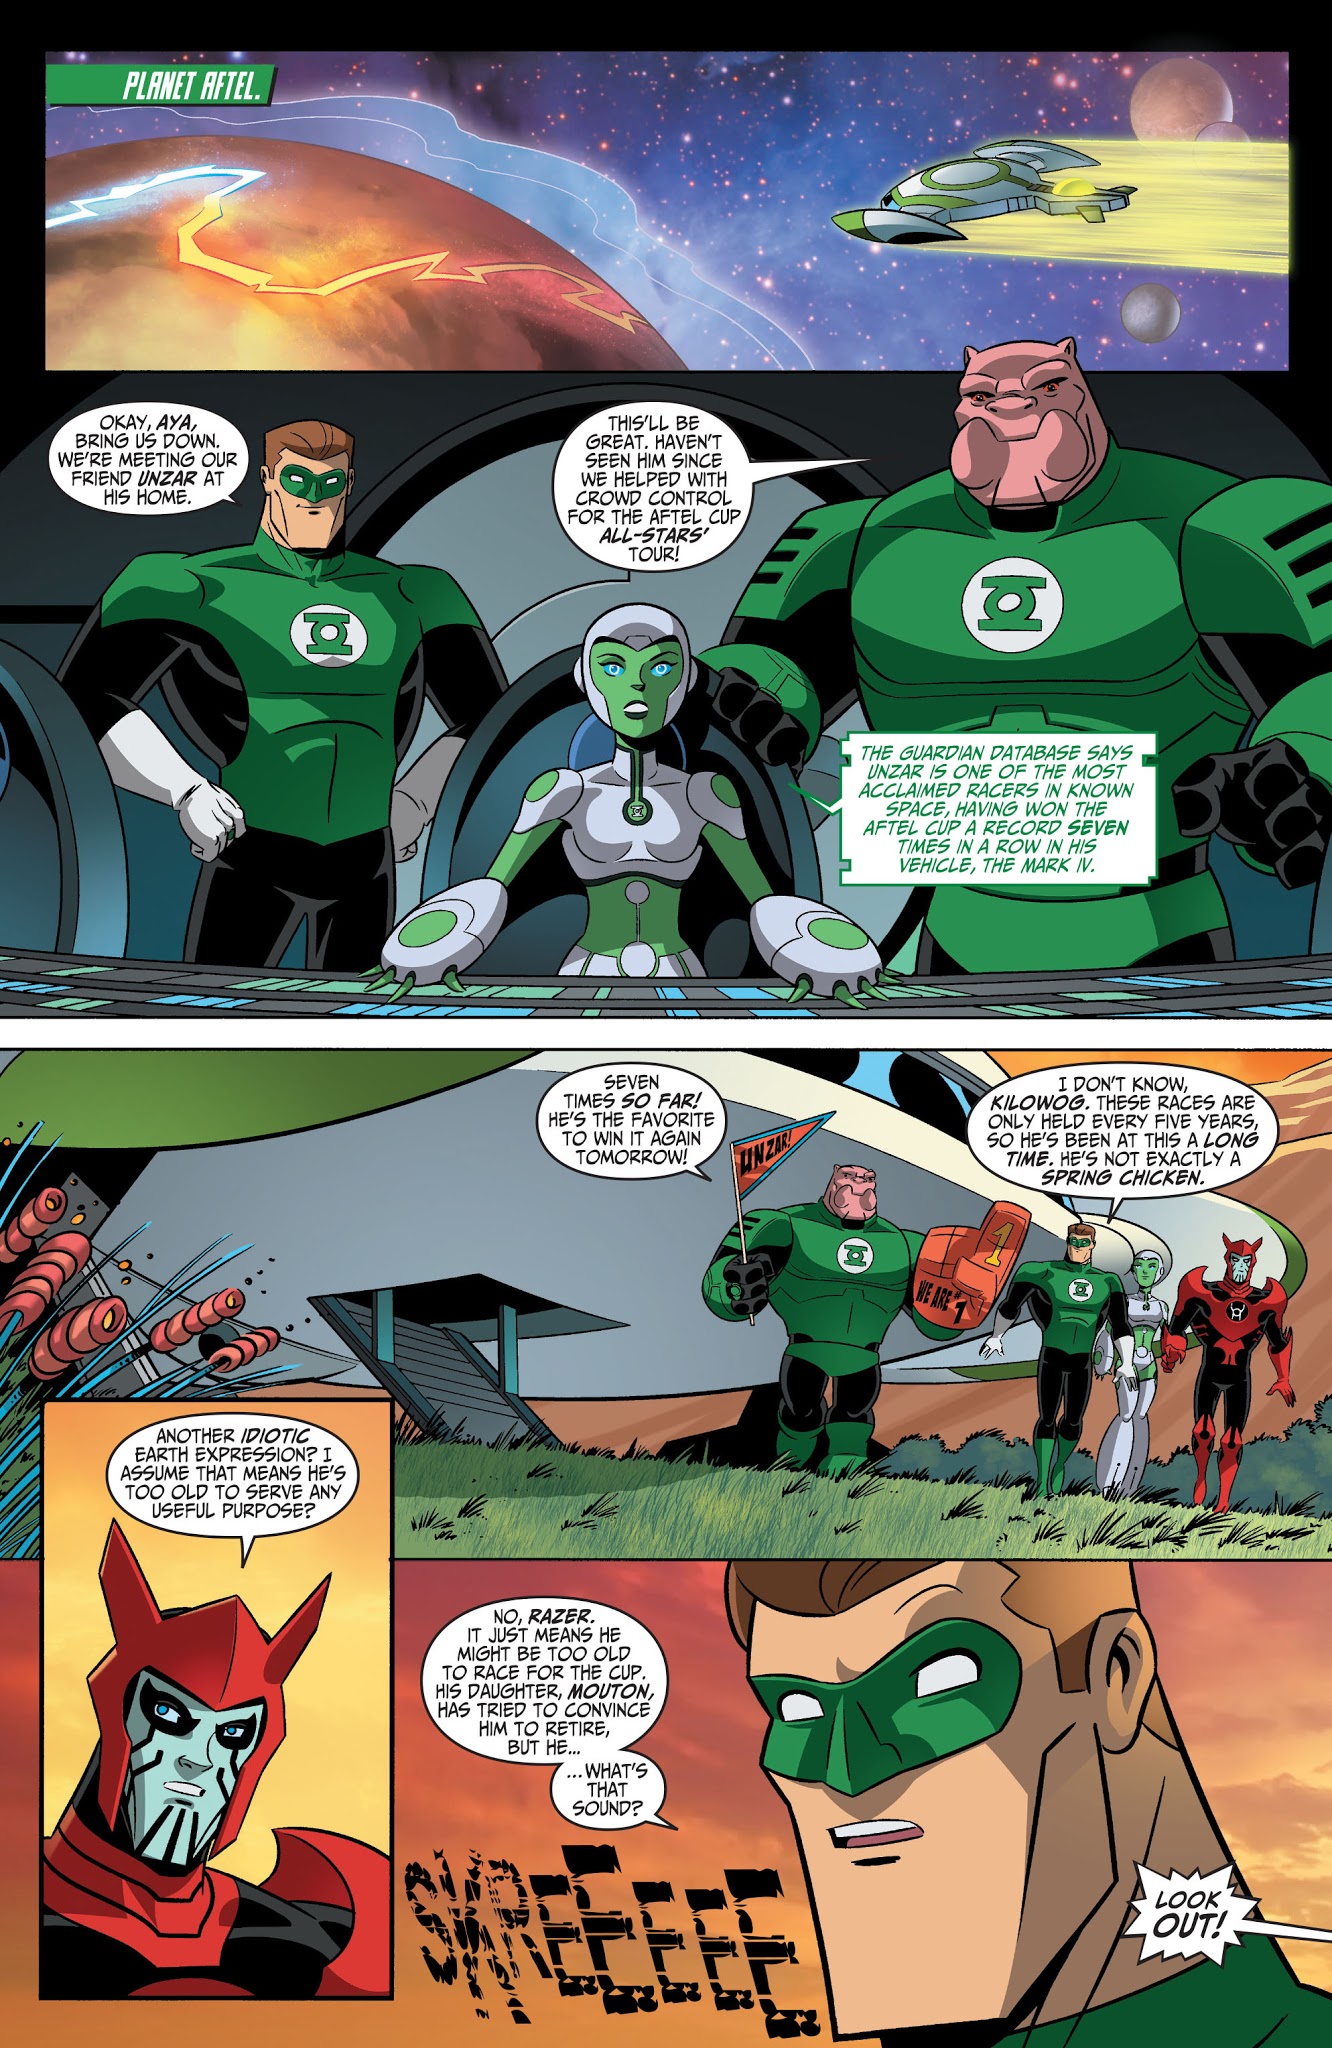 Green Lantern The Animated Series Issue 13 | Read Green Lantern The Animated  Series Issue 13 comic online in high quality. Read Full Comic online for  free - Read comics online in high quality .